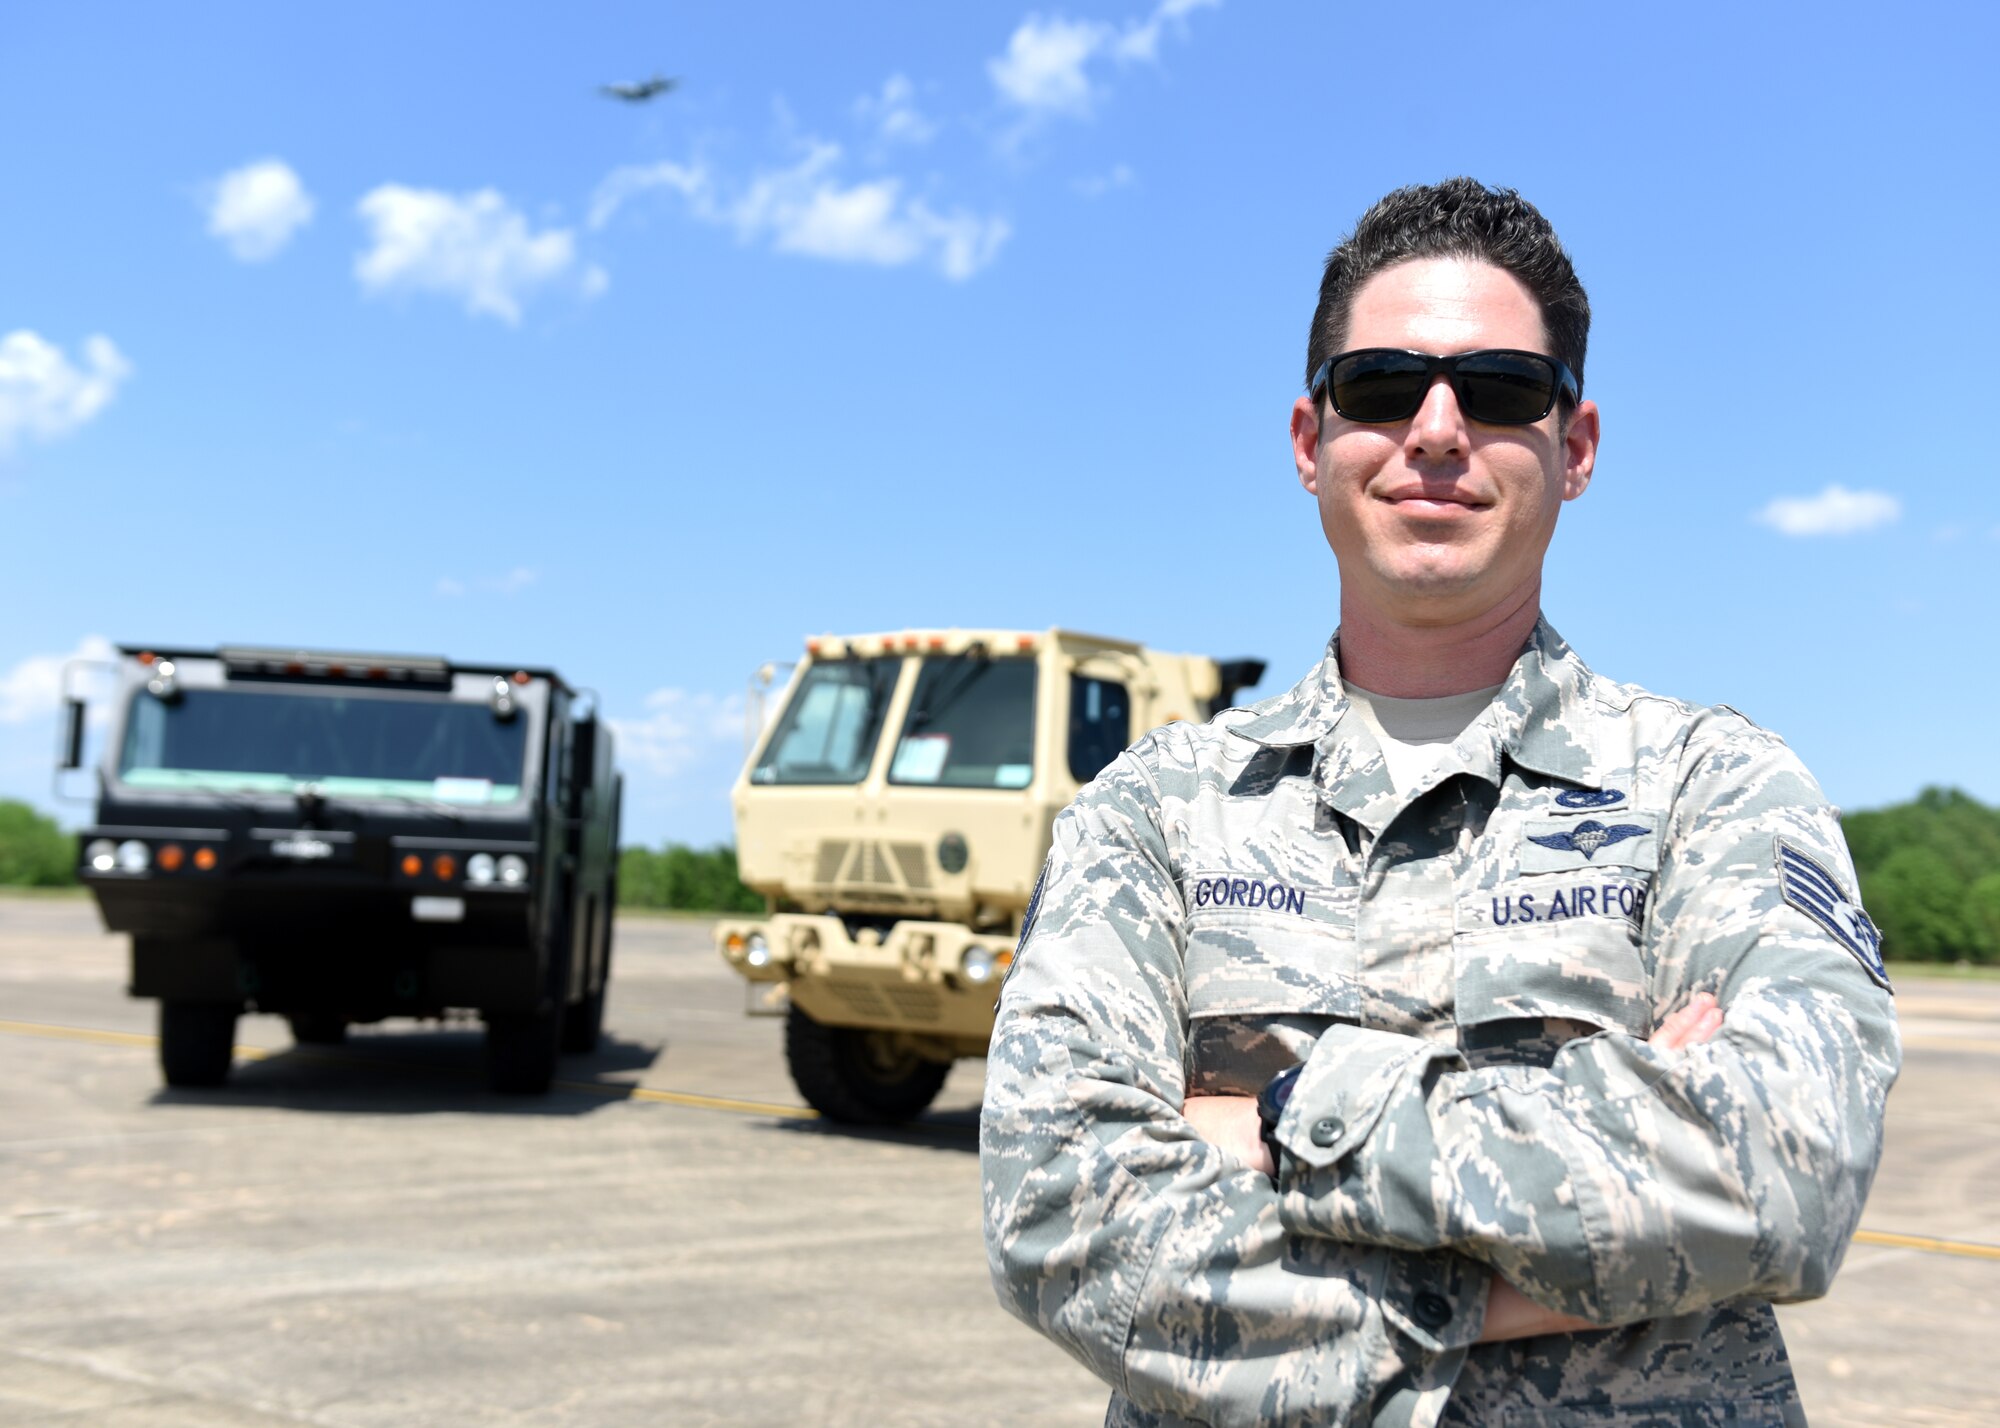 A male in uniform stands on a bright flightline in front of two vehicles.